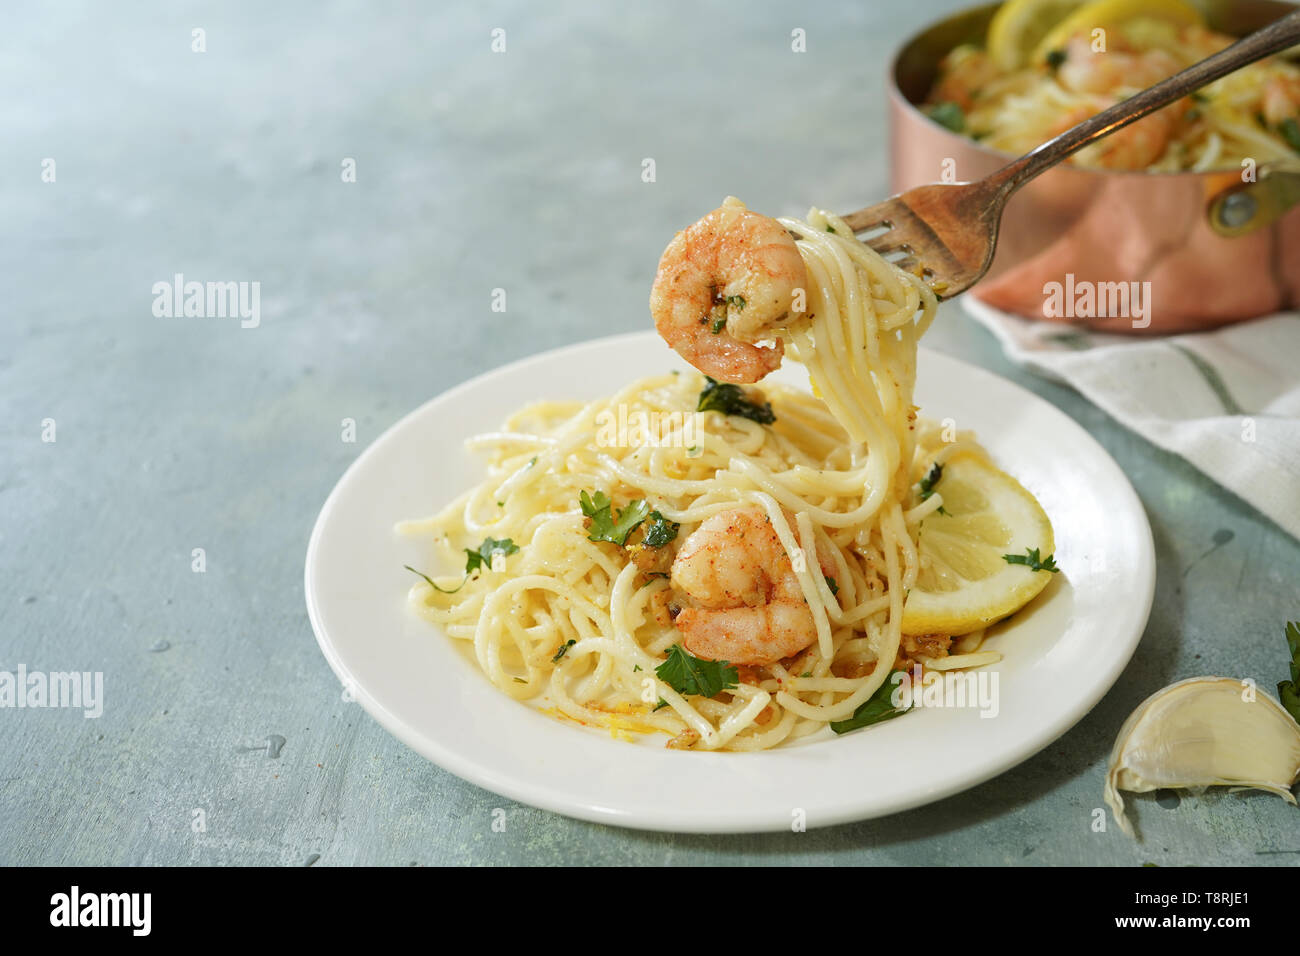 Homecooked Shrimp Scampi with Spaghetti pasta and lemon, selective focus Stock Photo